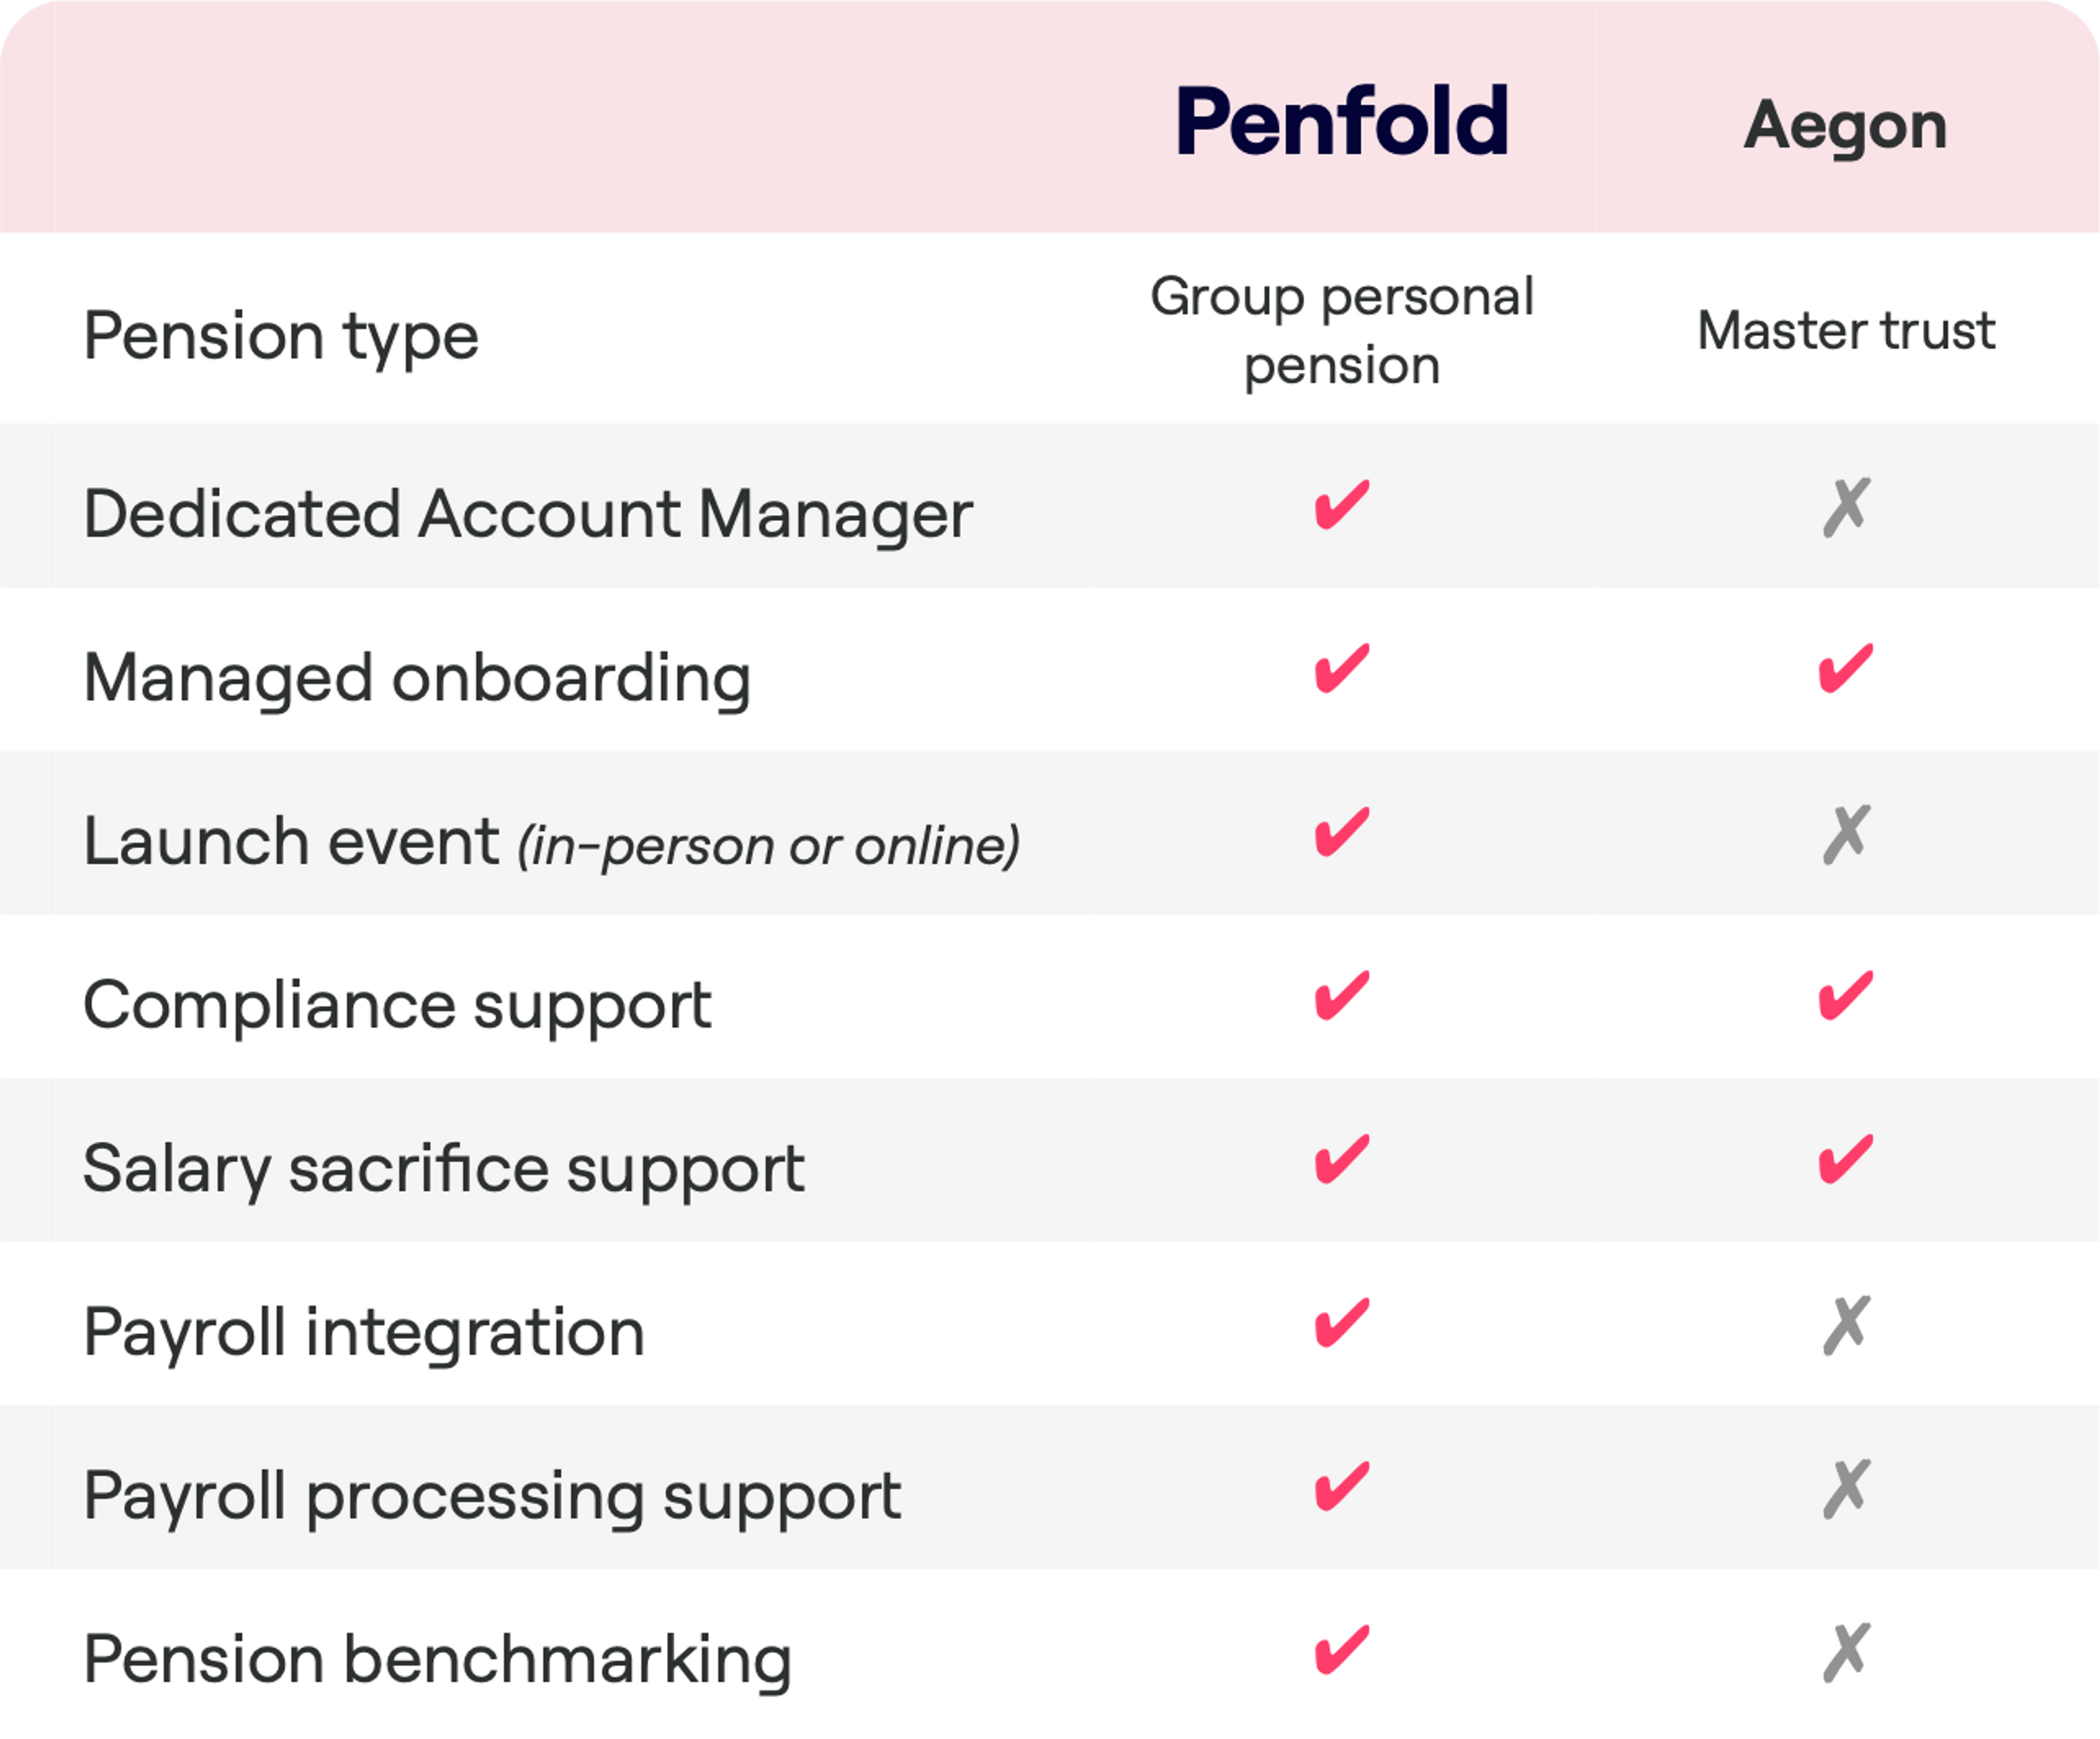 A comparison table between Penfold, offering a Group personal pension, and Aegon, under Master trust. The table lists features such as Dedicated Account Manager, Managed onboarding, Launch event, Compliance support, Salary sacrifice support, Payroll integration, Payroll processing support, and Pension benchmarking. Penfold offers all eight listed features. Aegon provides Managed onboarding, Compliance support, and Salary sacrifice support but lacks the other services.